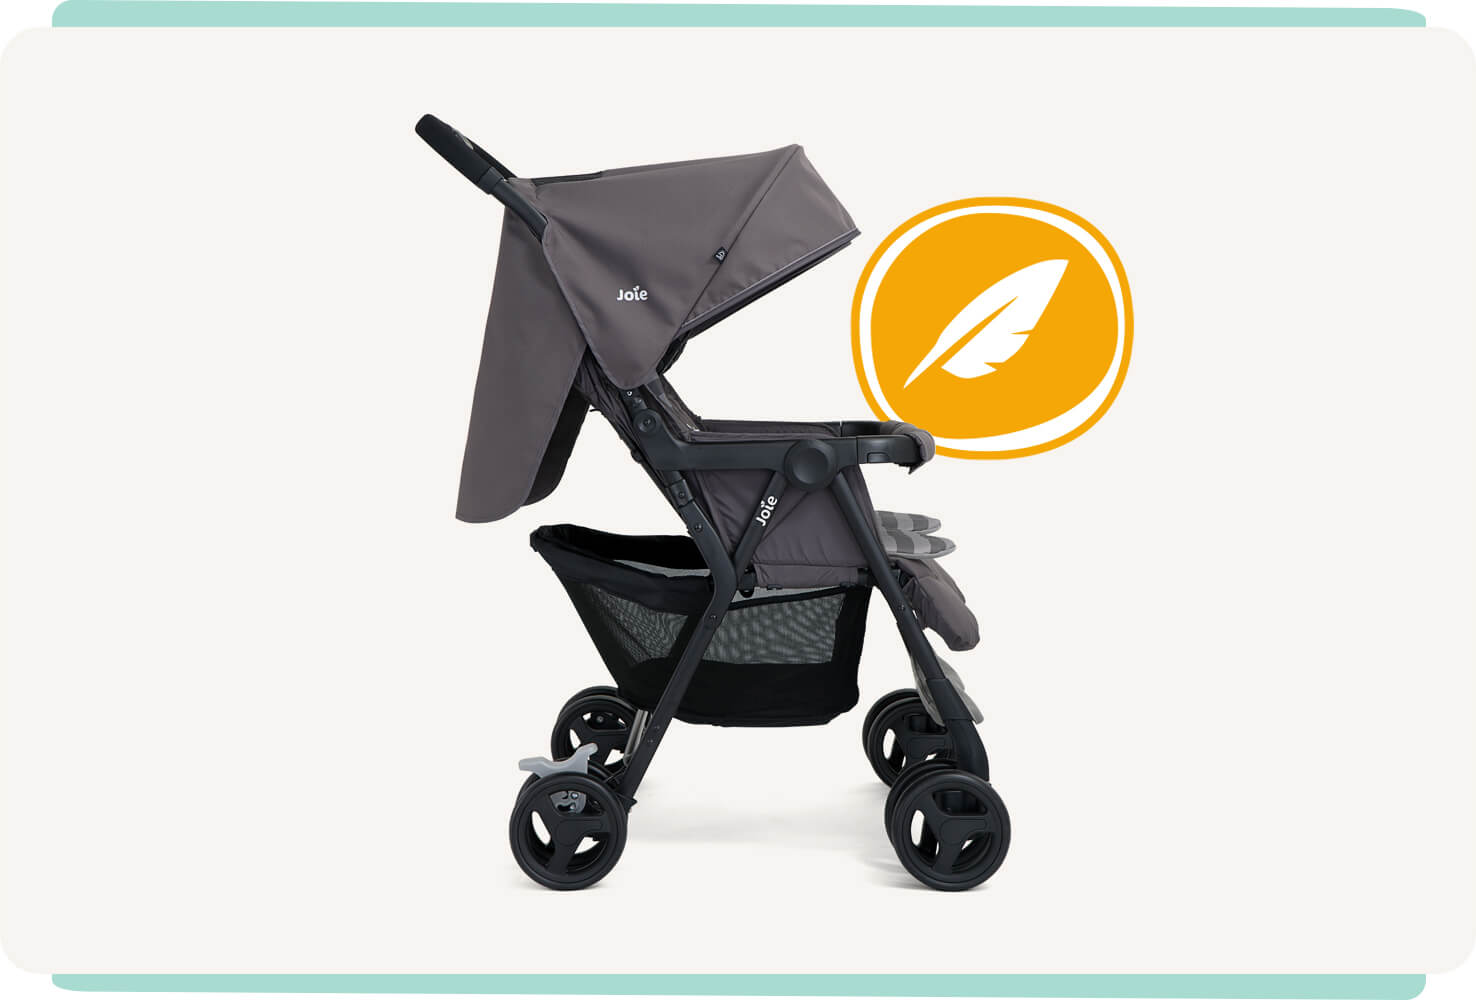  The Joie Aire Twin double stroller in dark gray, in profile facing to the right, sitting next to an orange circle with a white outline and a white feather icon inside.